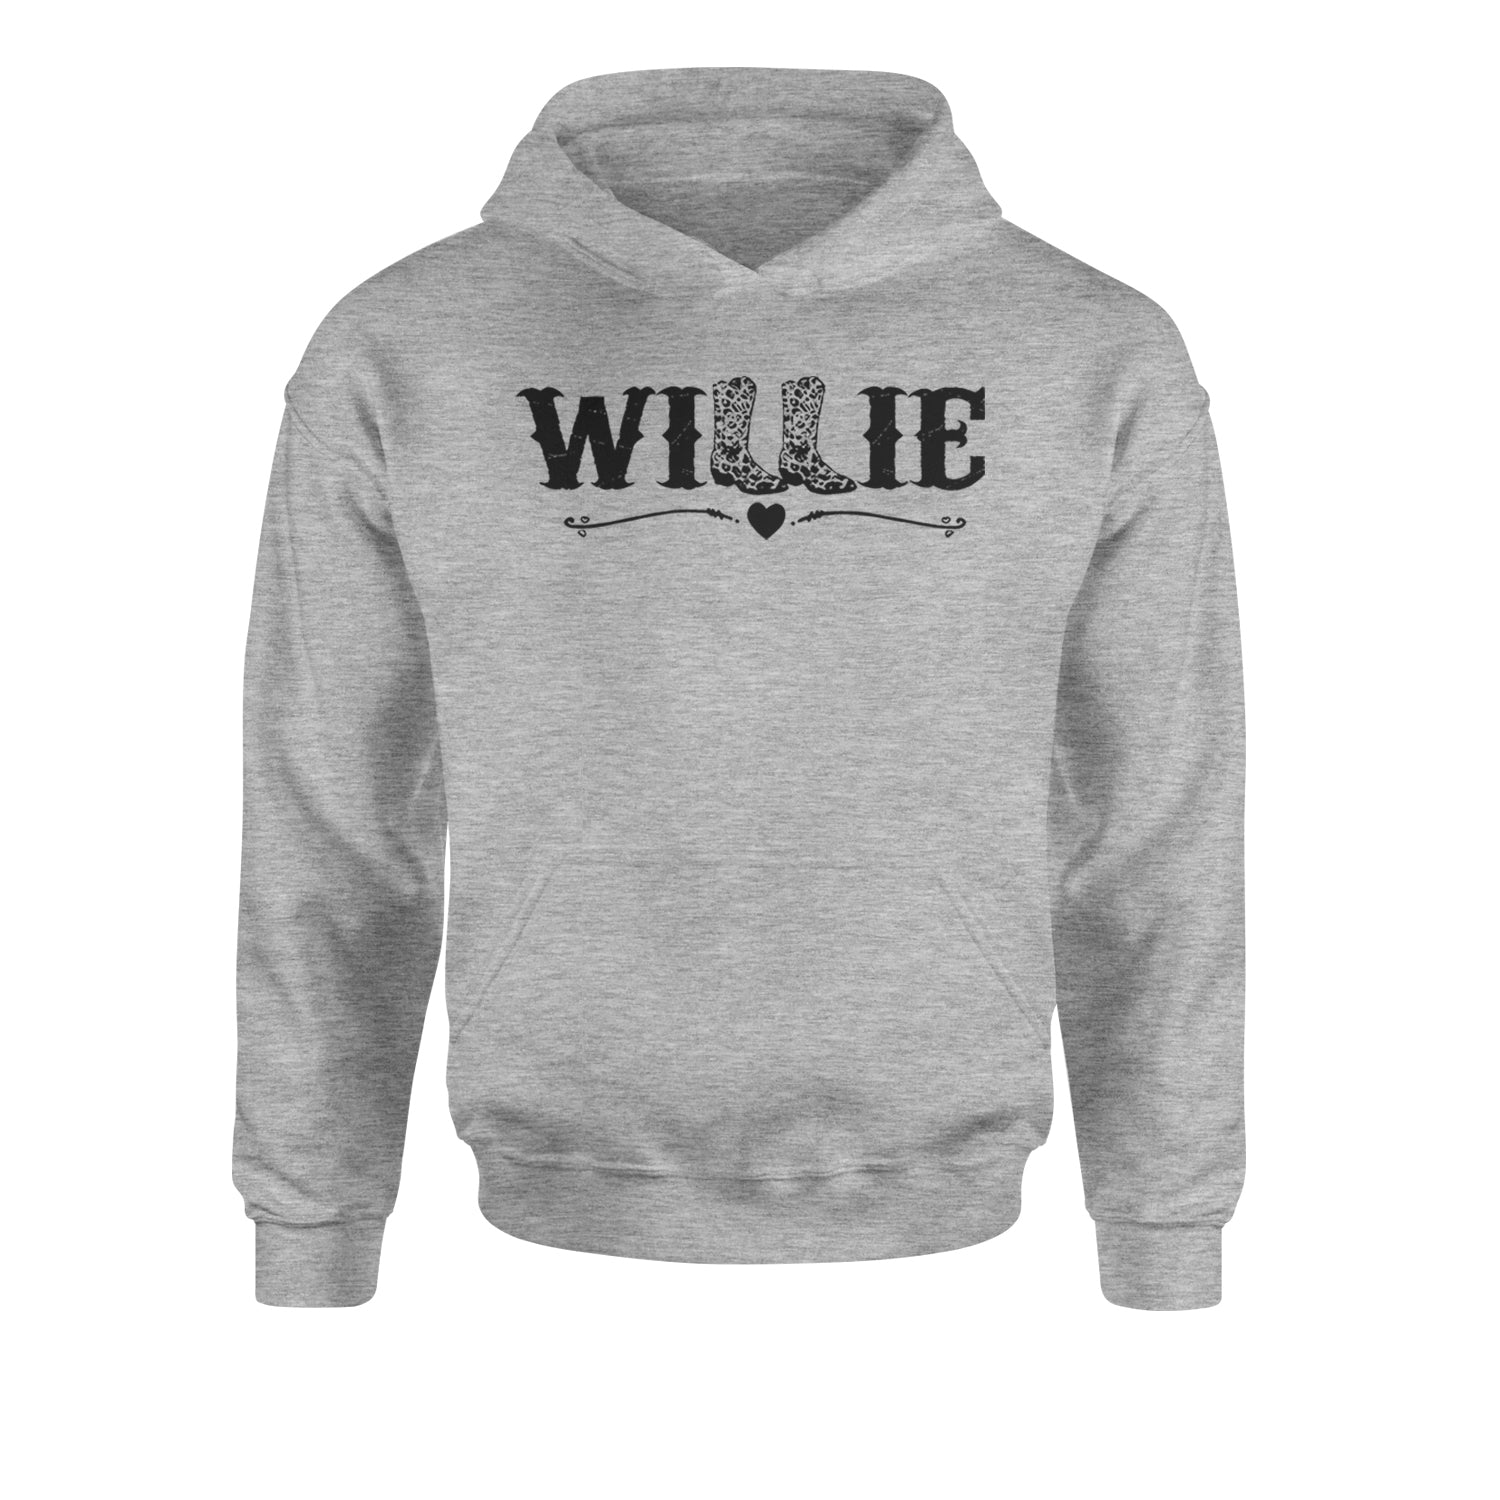 Willie Cowboy Boots Hippy Country Music Youth-Sized Hoodie